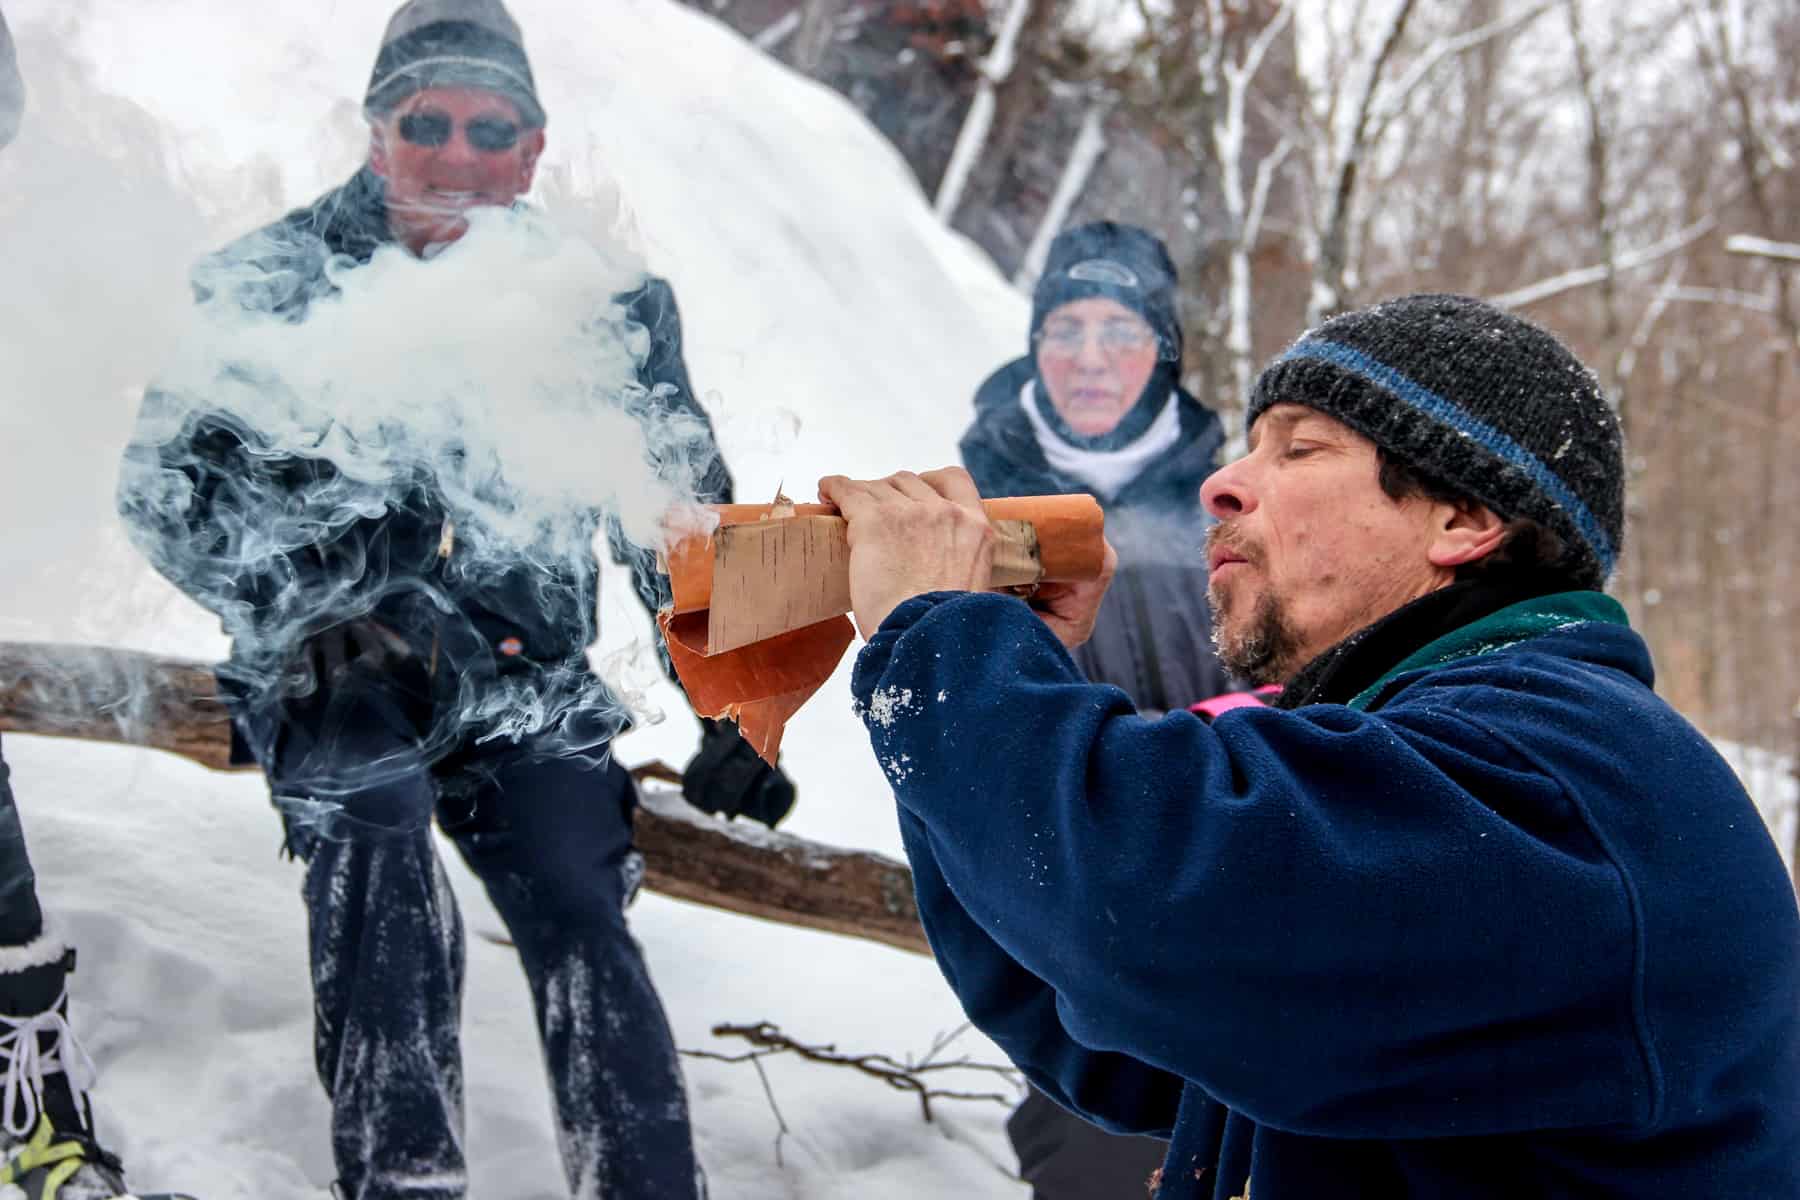 Watched by two people, a man blows into paper releasing a bellow of smoke in a snow drenched forest.